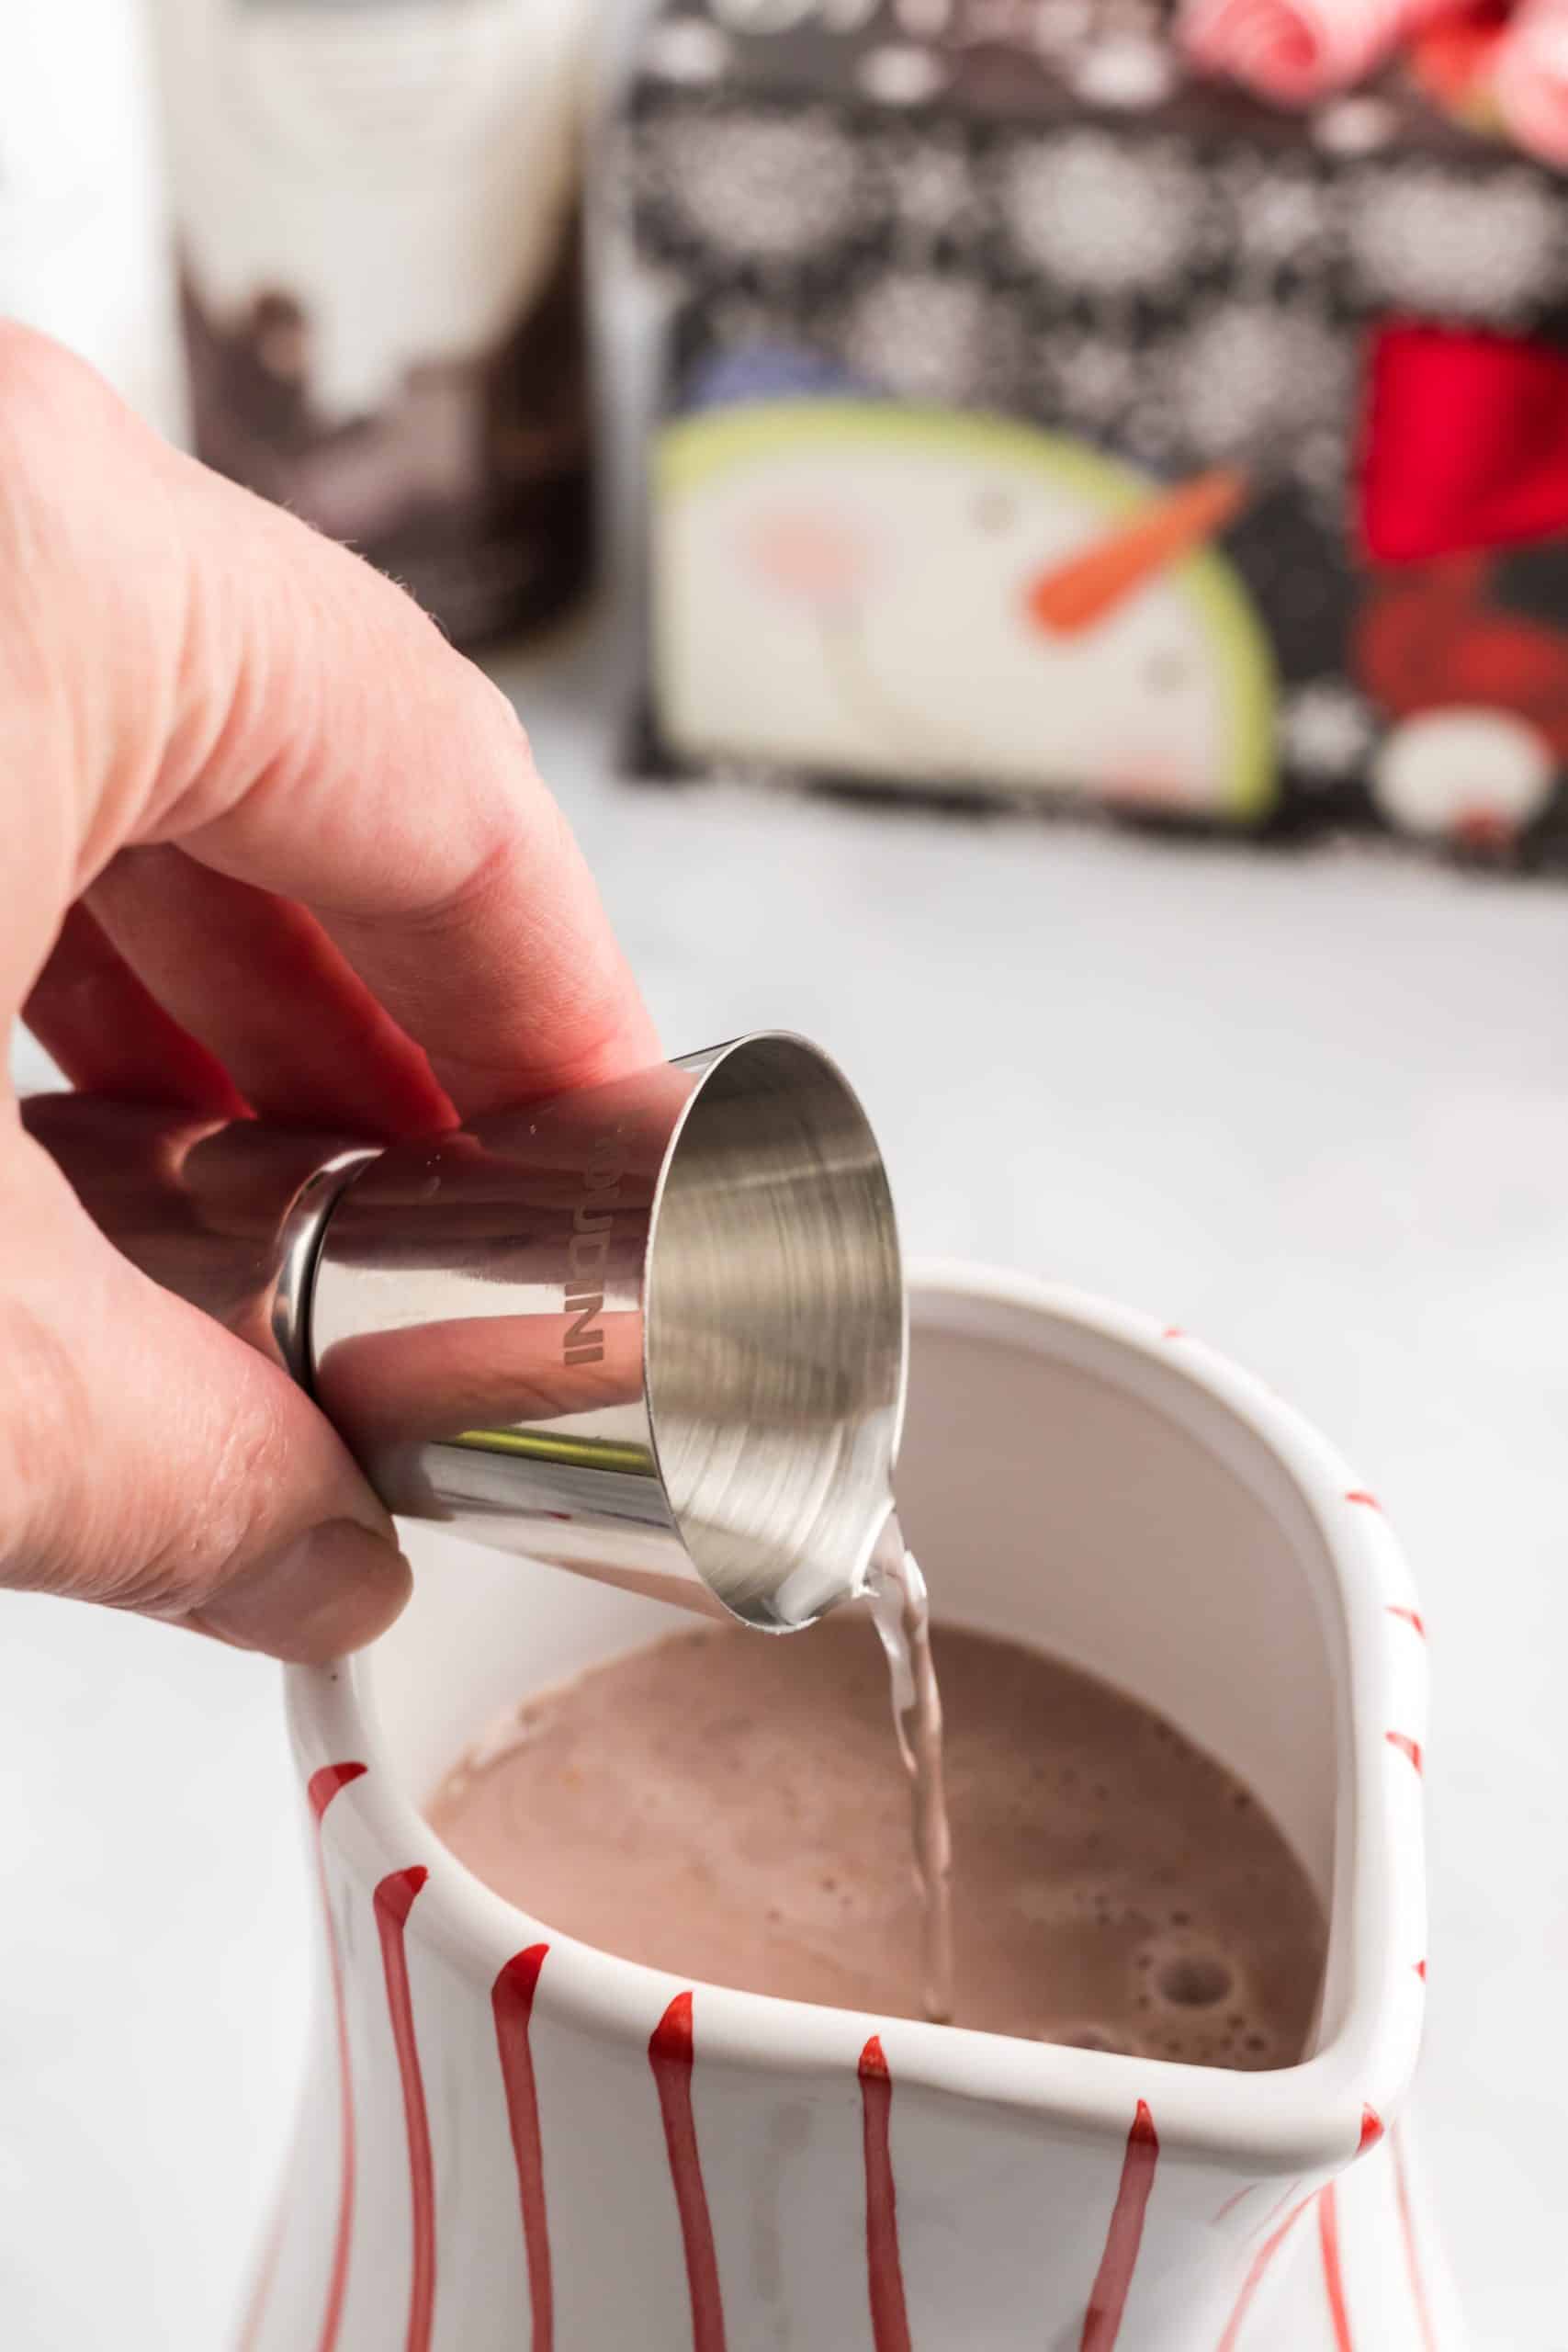 adding a jigger of whipped cream flavored vodka to hot cocoa mix in a white mug.